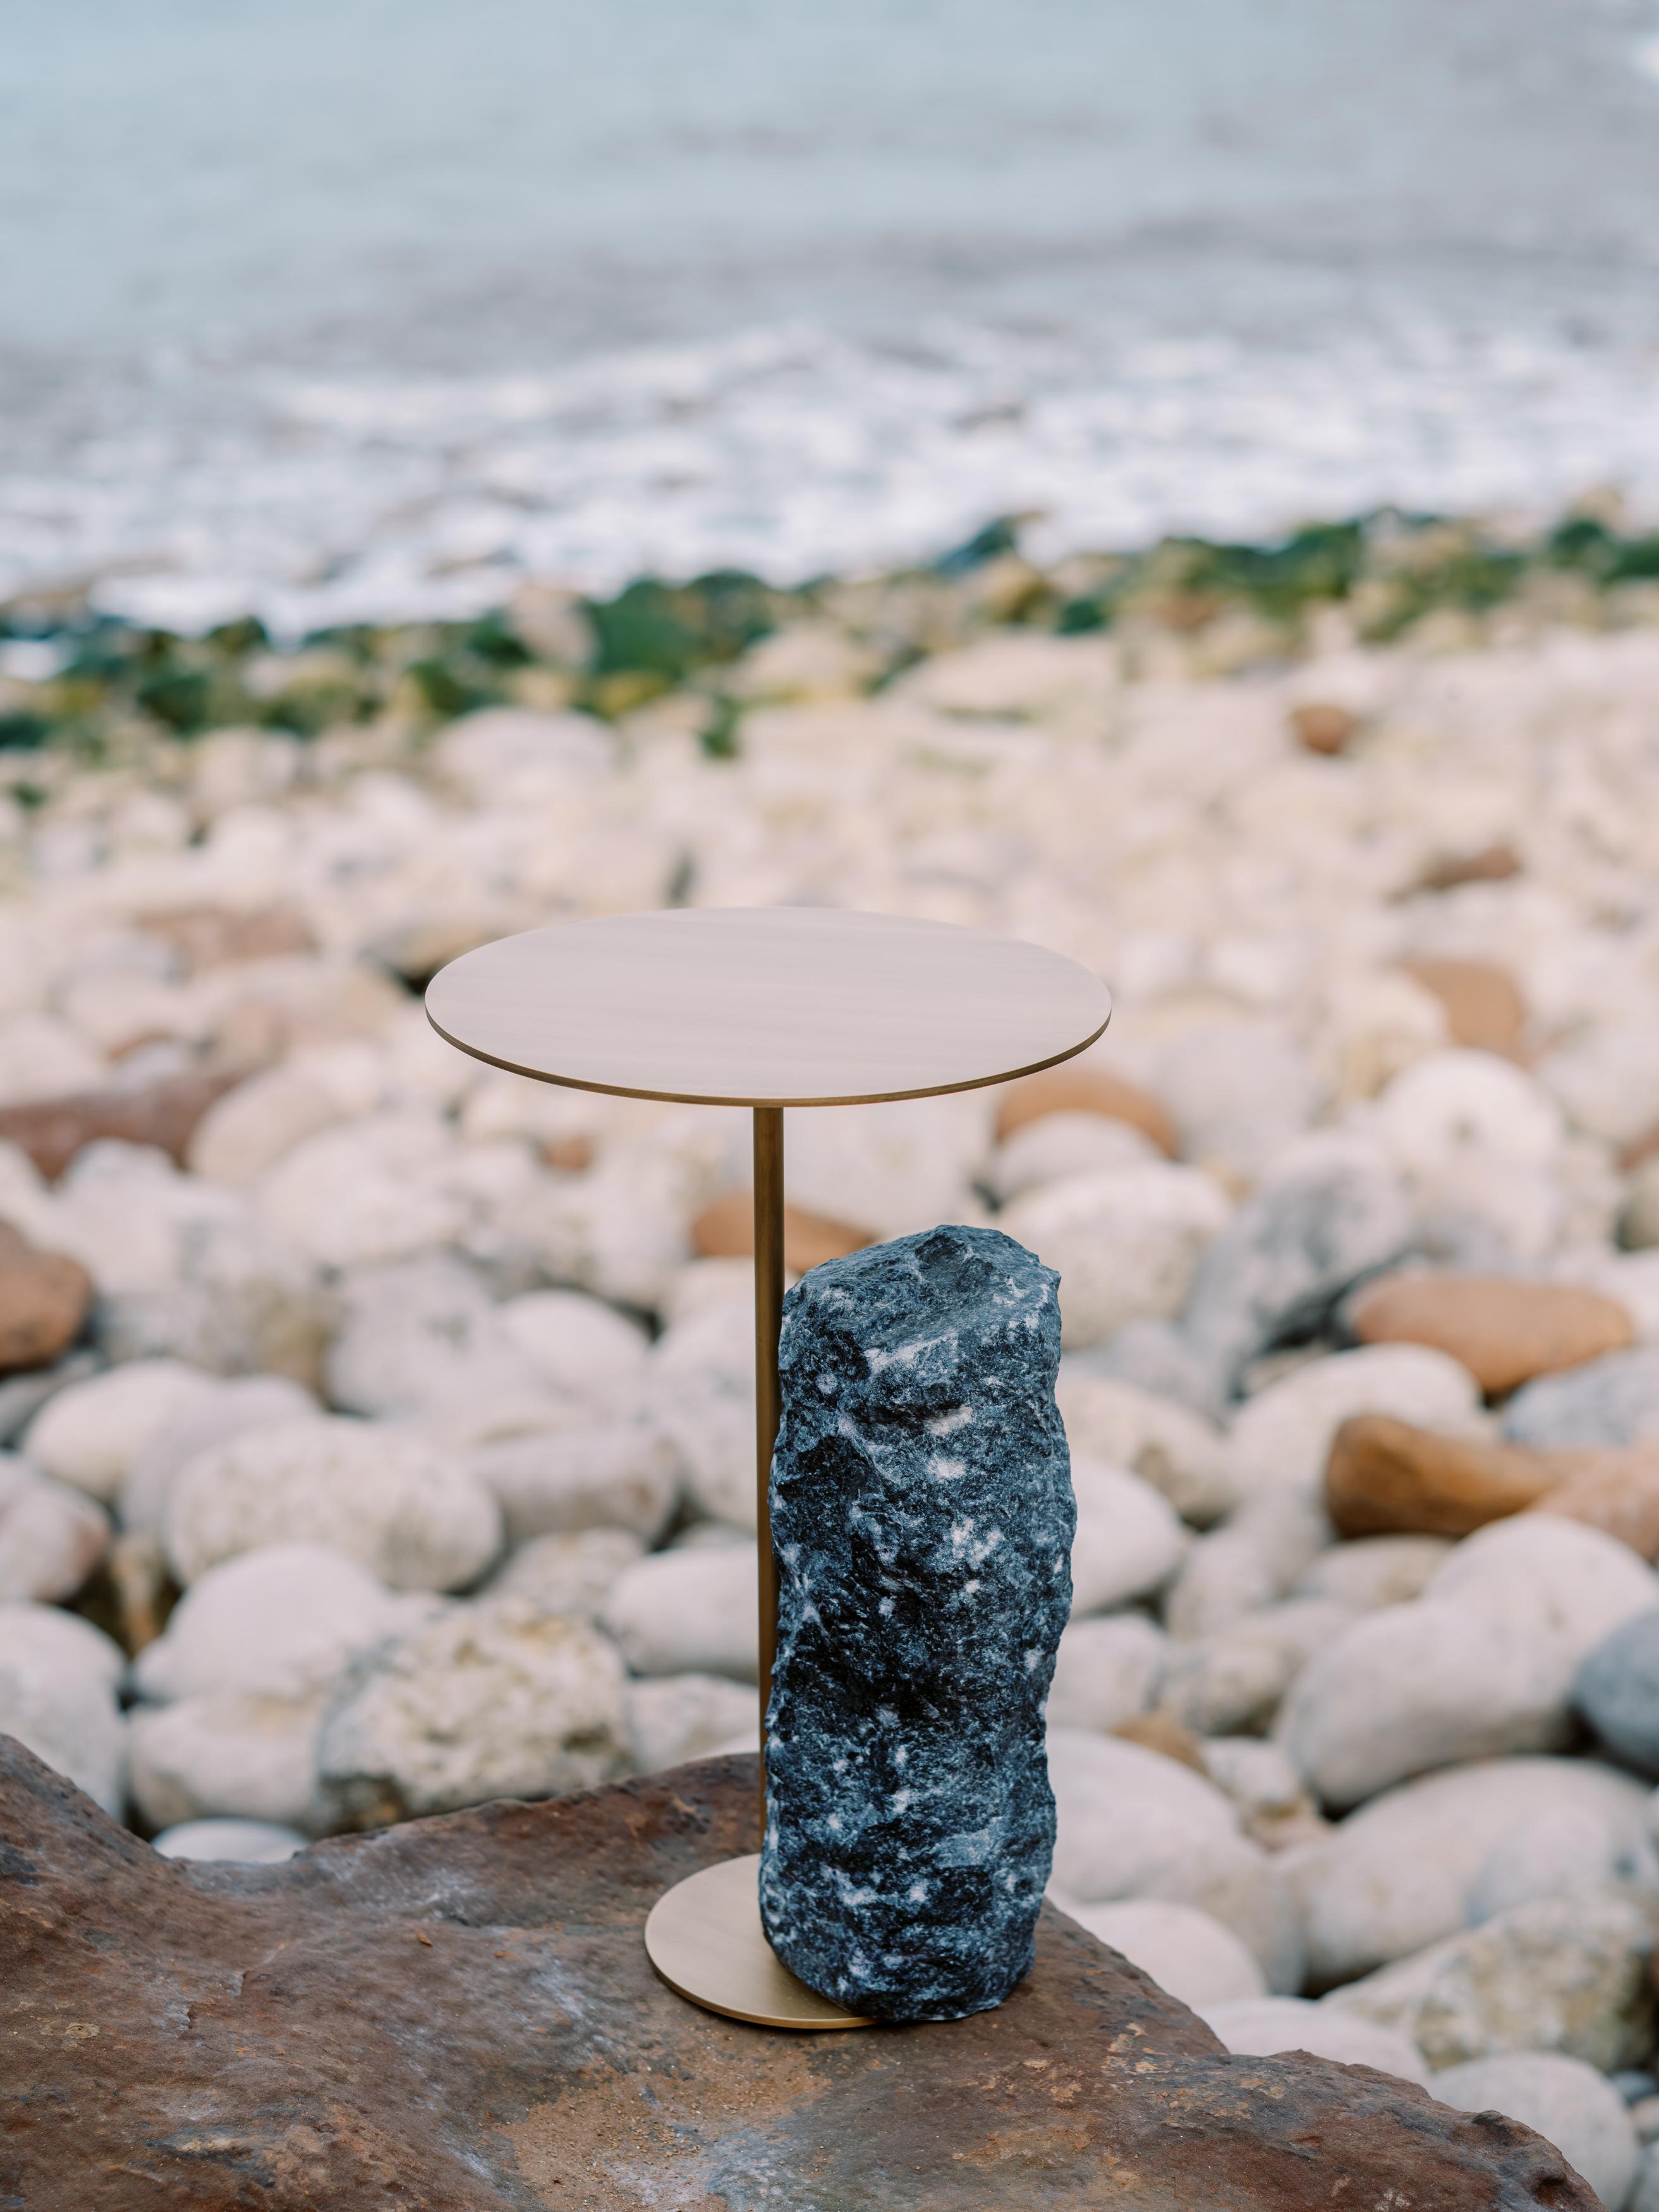 Contemporary Modern Pico Side Table, Silver Portoro Marble, Handmade Portugal by Greenapple For Sale